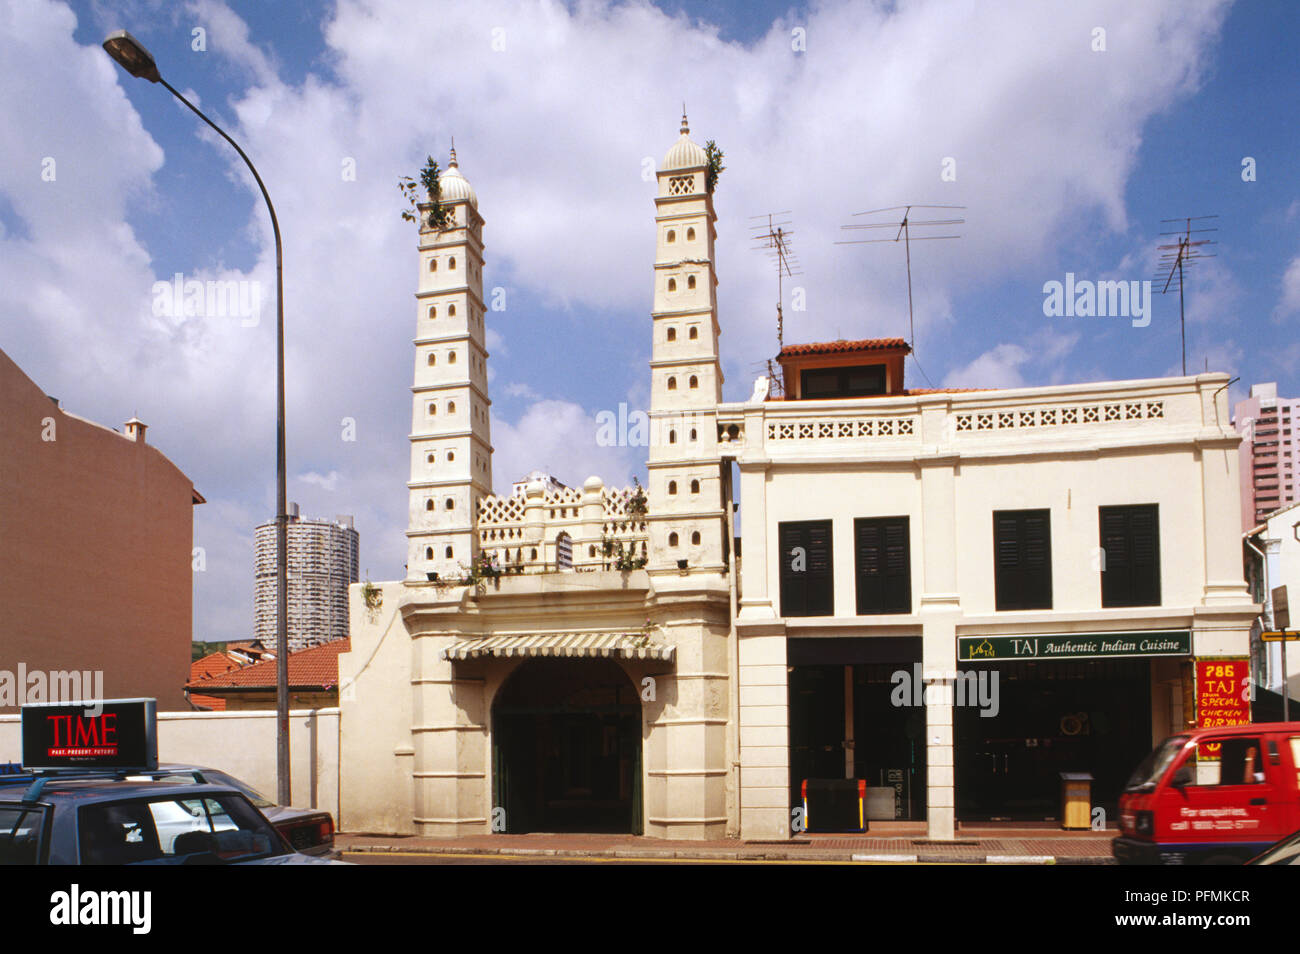 Singapore, Chinatown, exterior of the Jamae Mosque, dating from the 1830s, fusing Chinese, Anglo-Indian and Malay architectural styles, minarets resting on two tall towers either side of entrance, cream coloured brick, entrance archway. Stock Photo